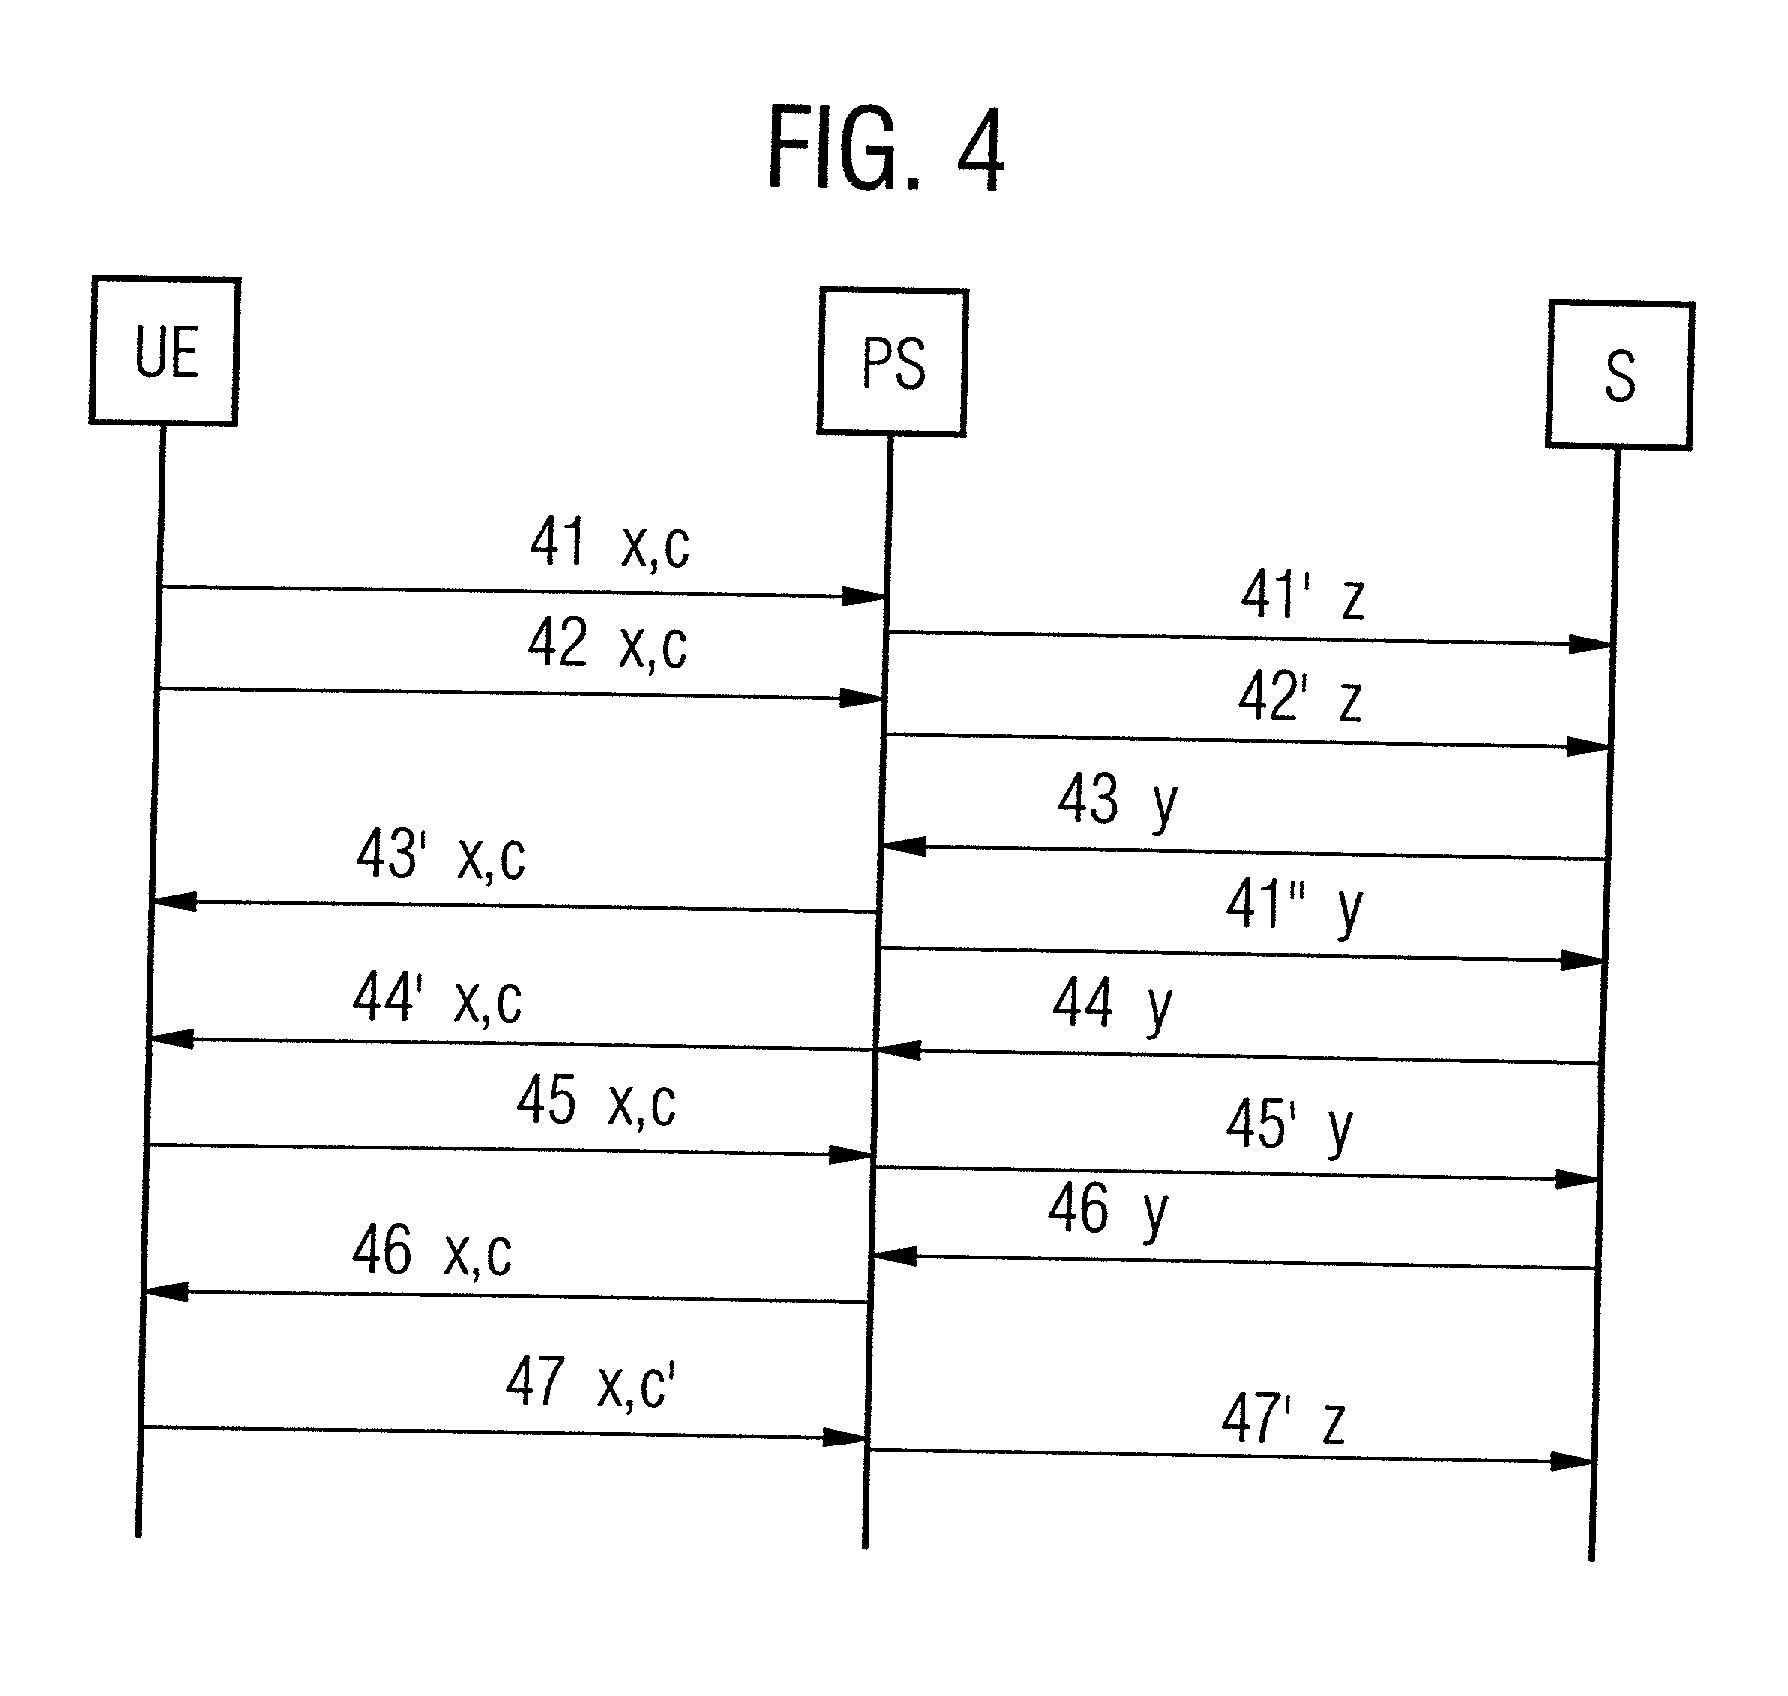 Method for an improved interworking of a user application and a server